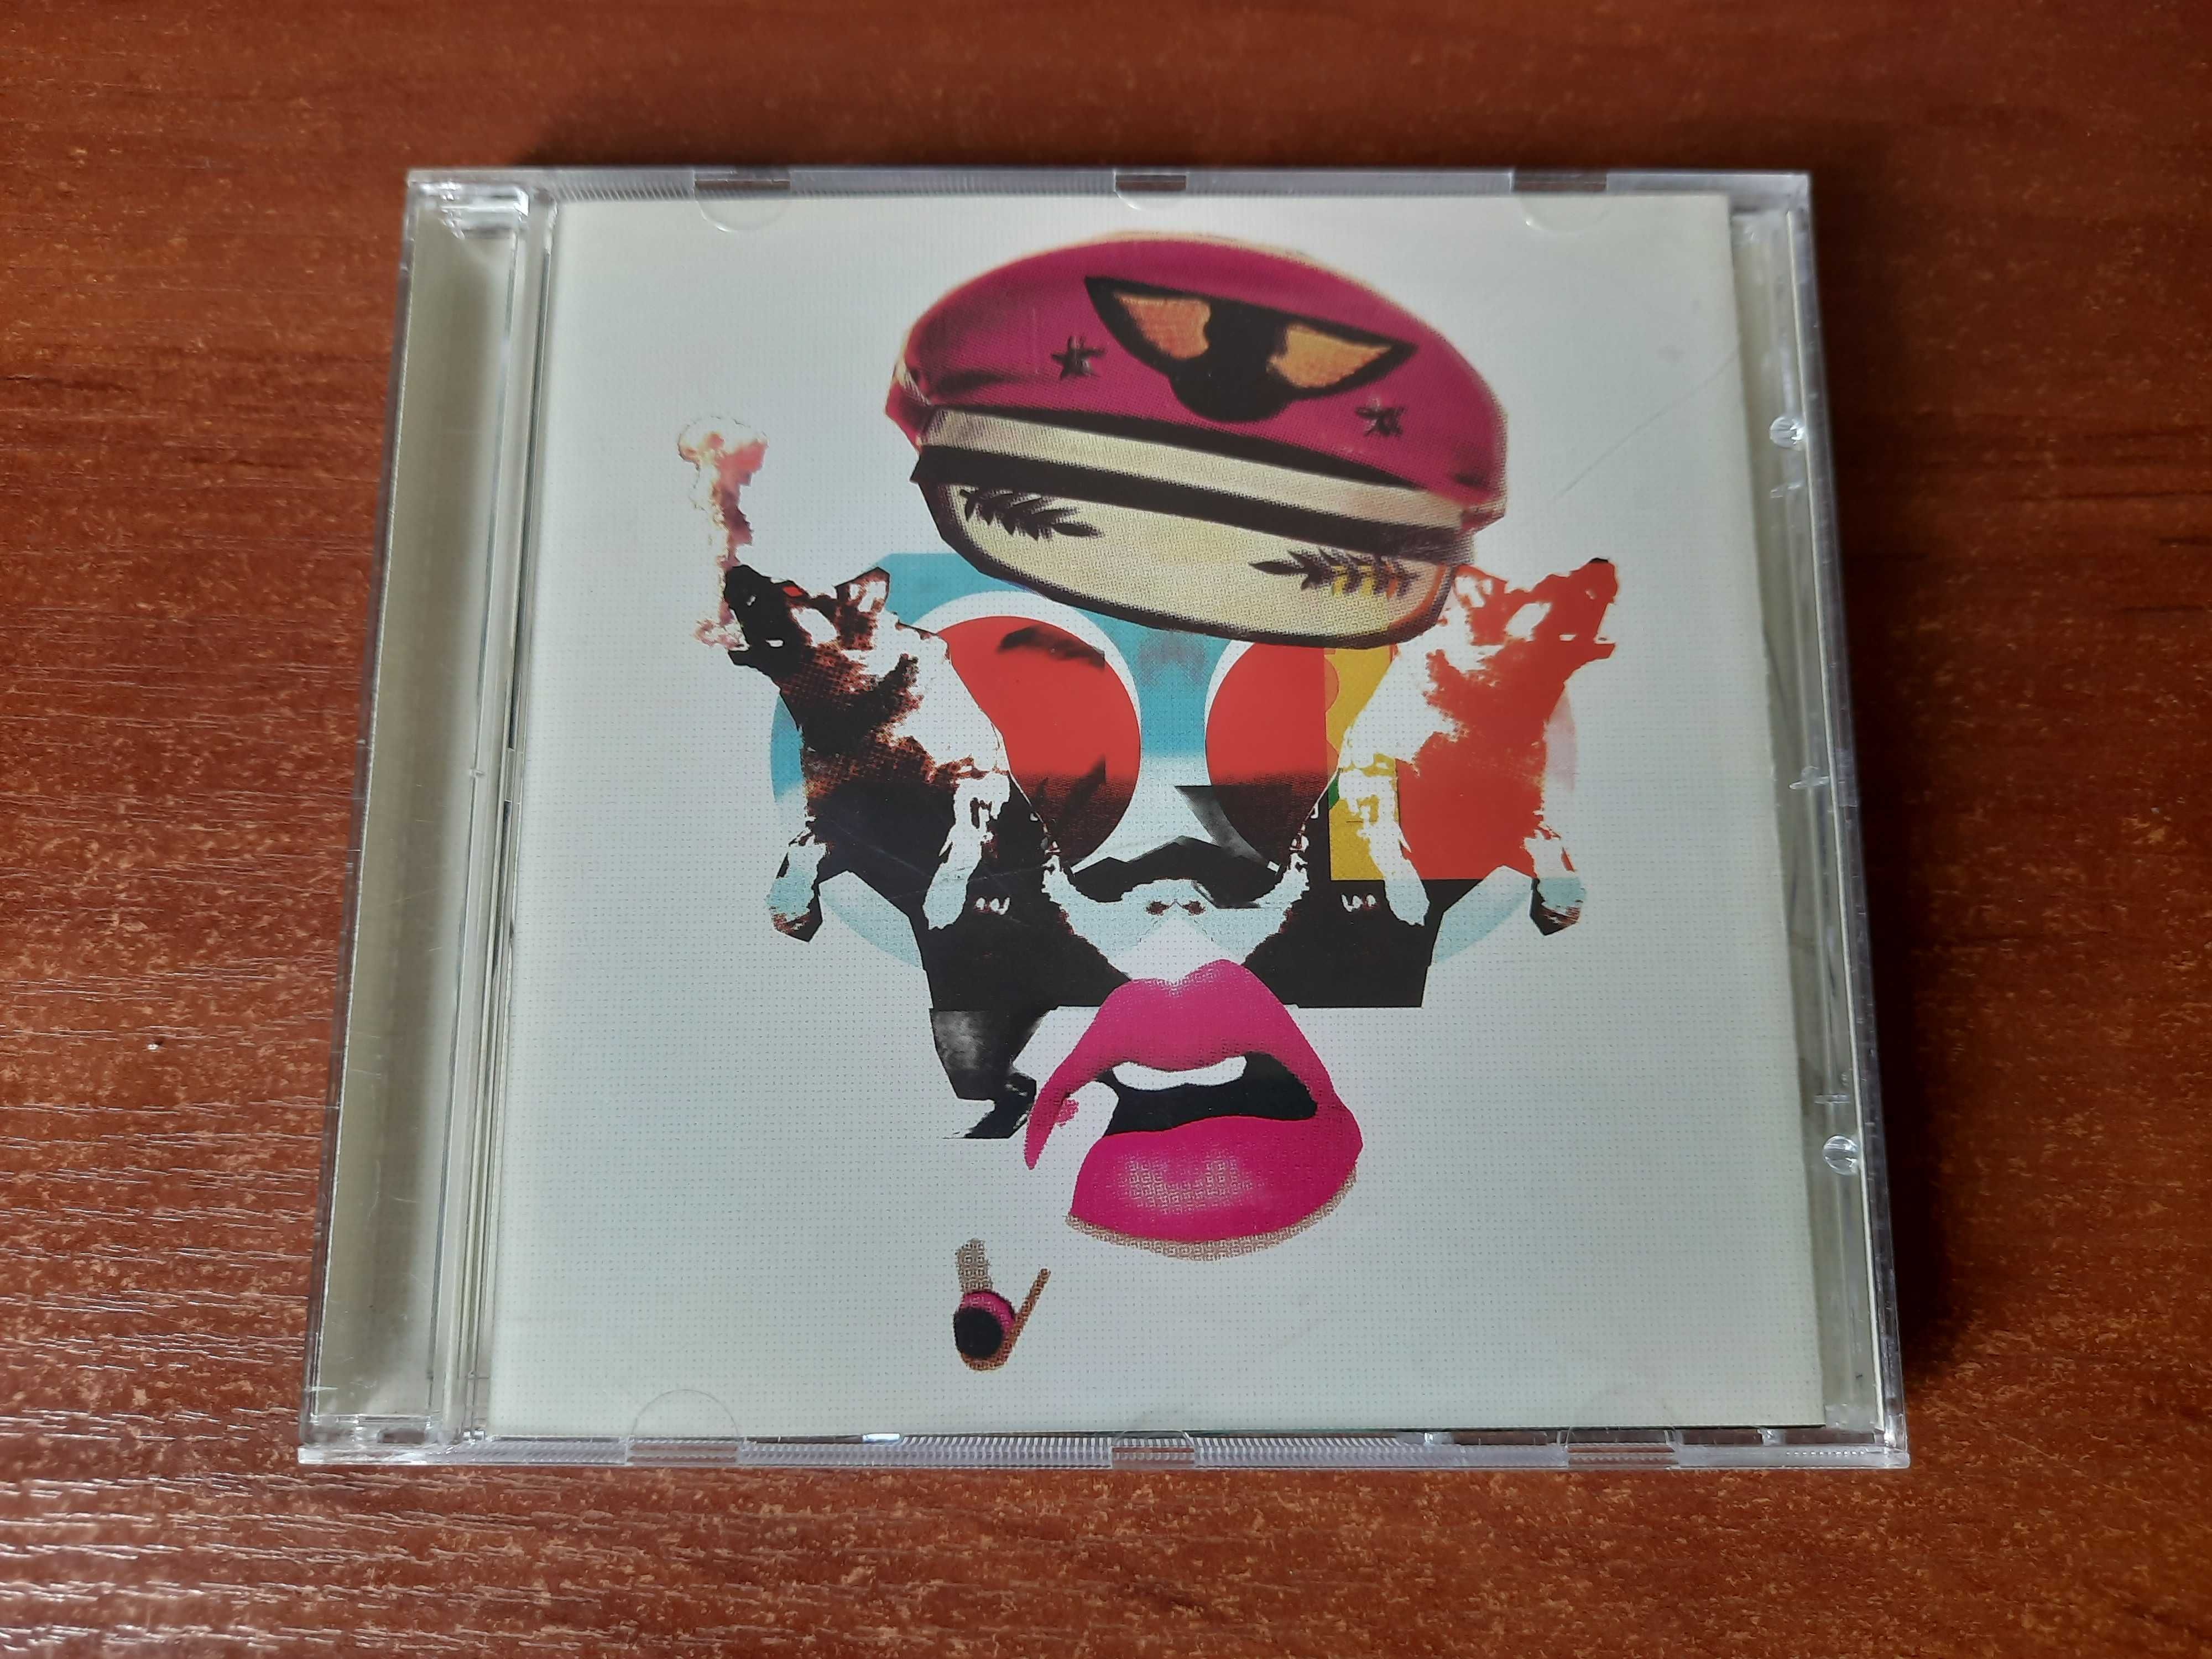 Audio CD The Prodigy - Always Outnambered, Never Outganned